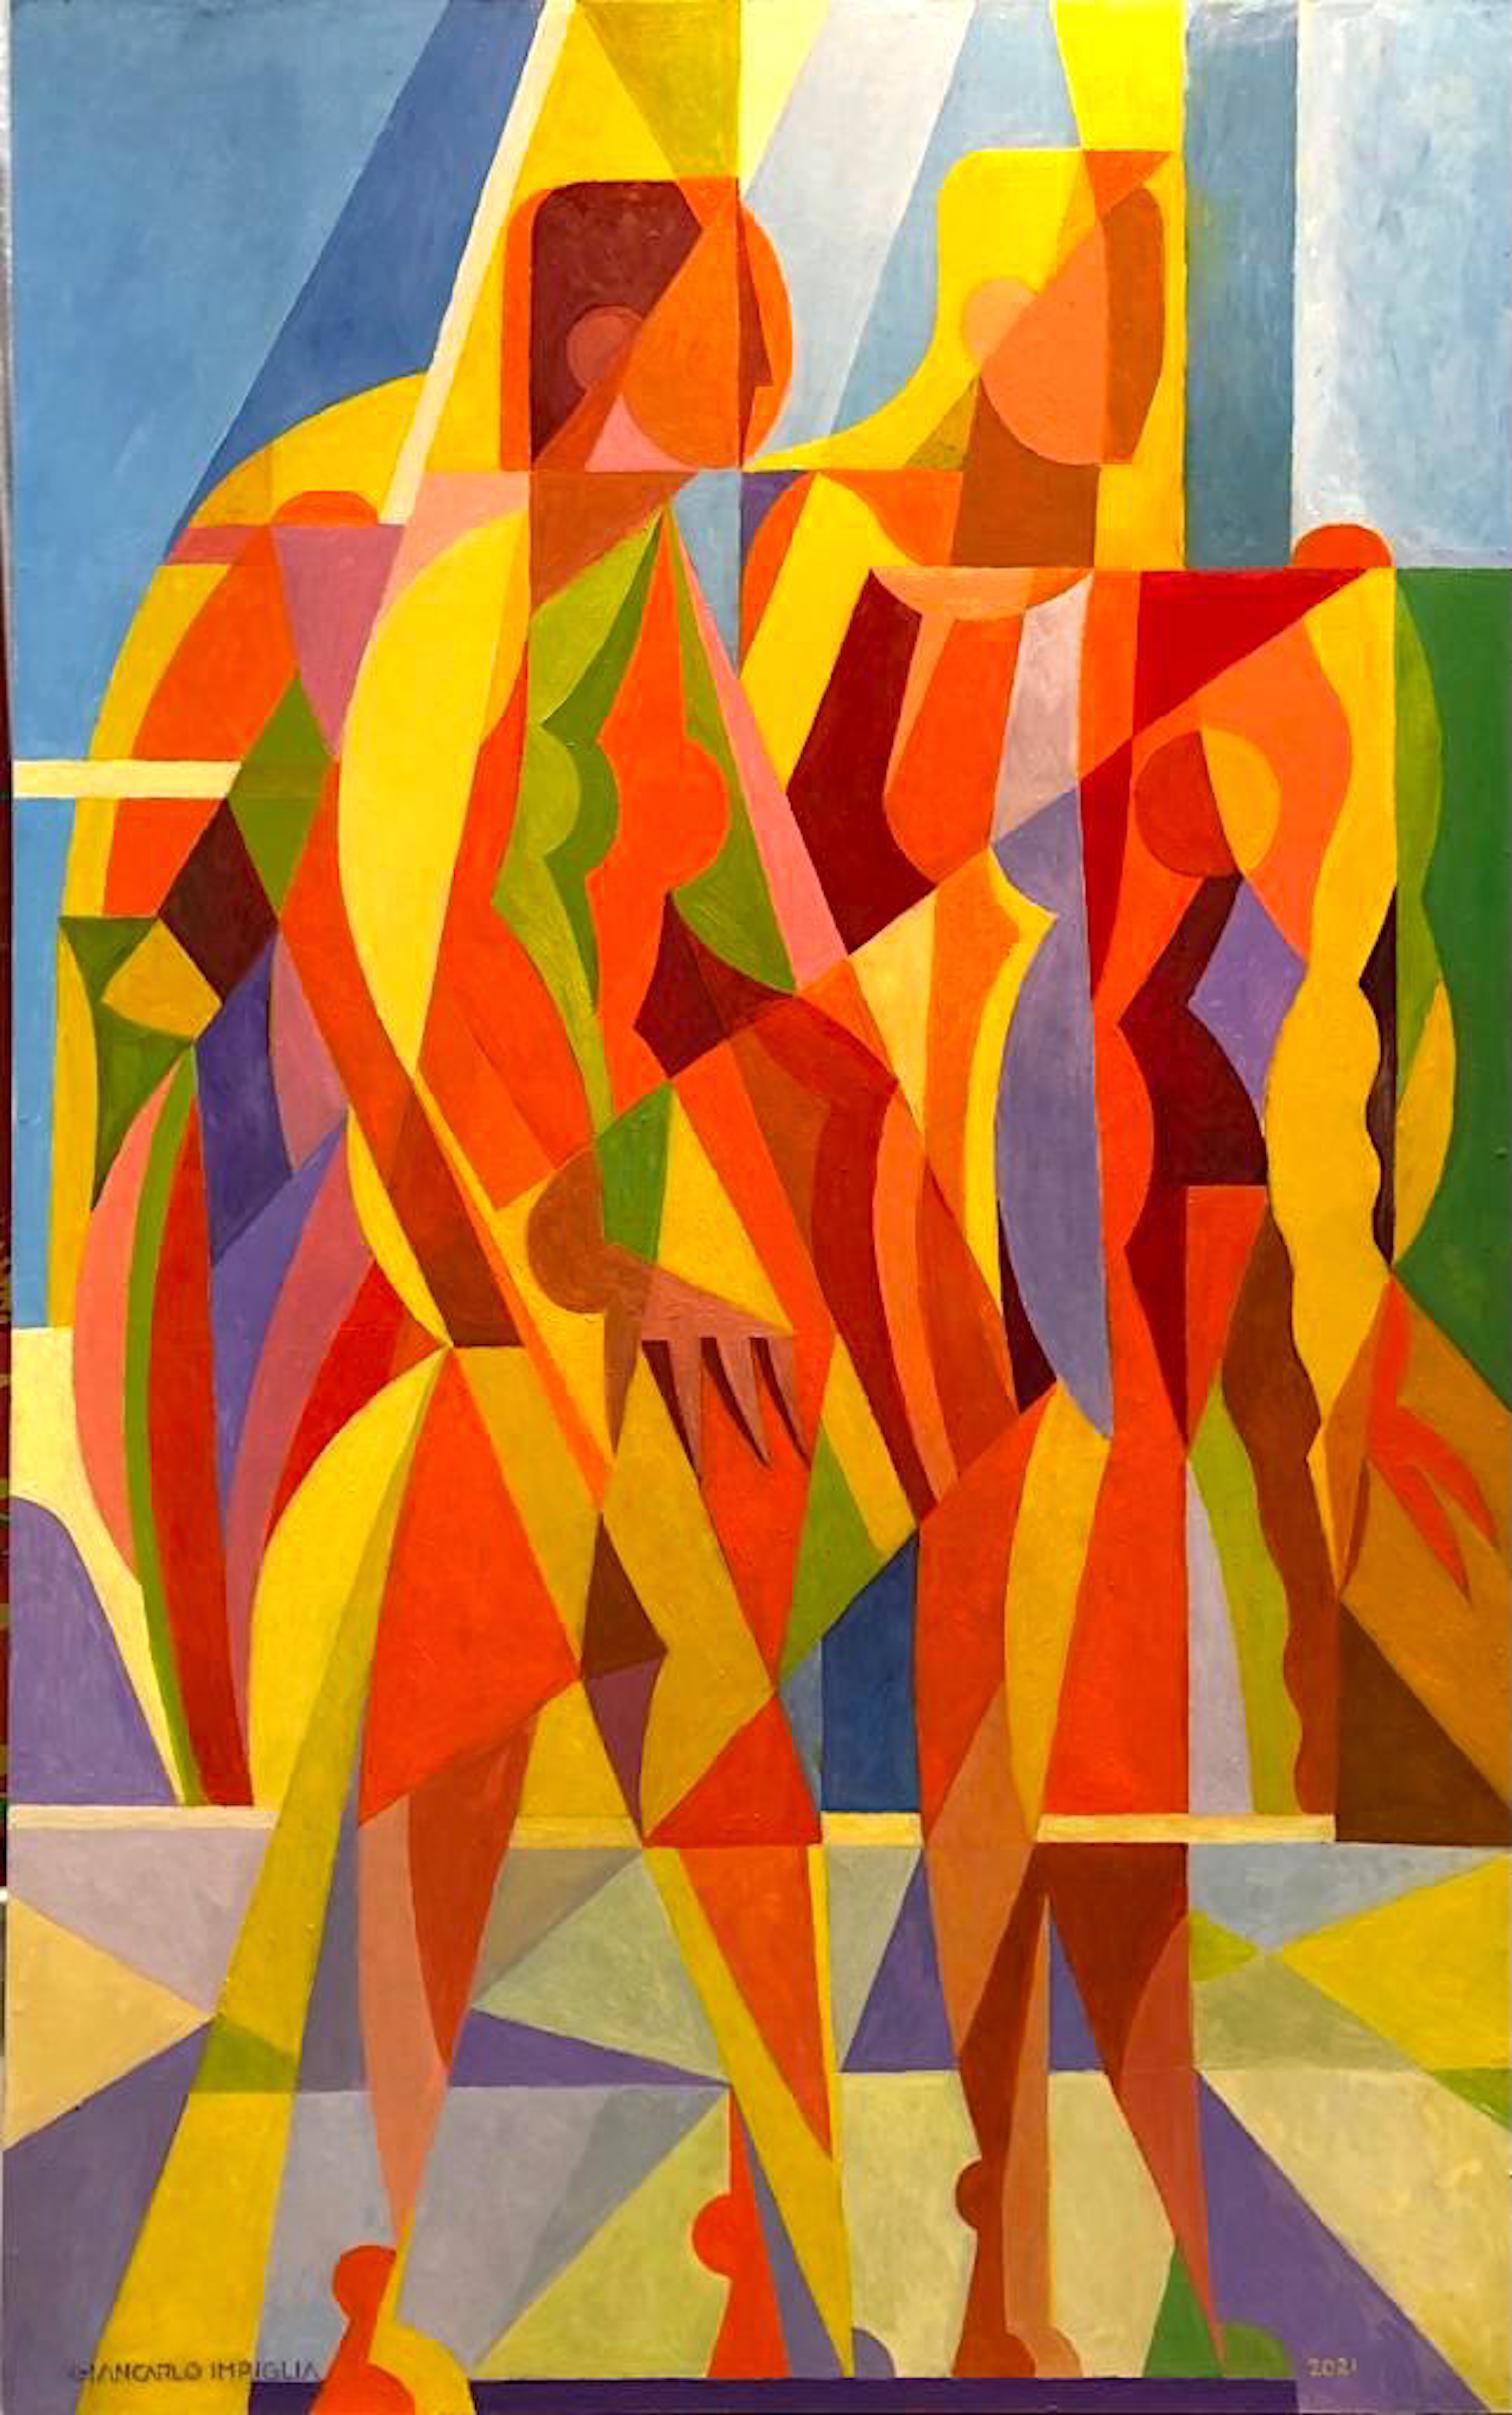 Beautiful cubist style oil painting "A Day in the Sun" by Impiglia